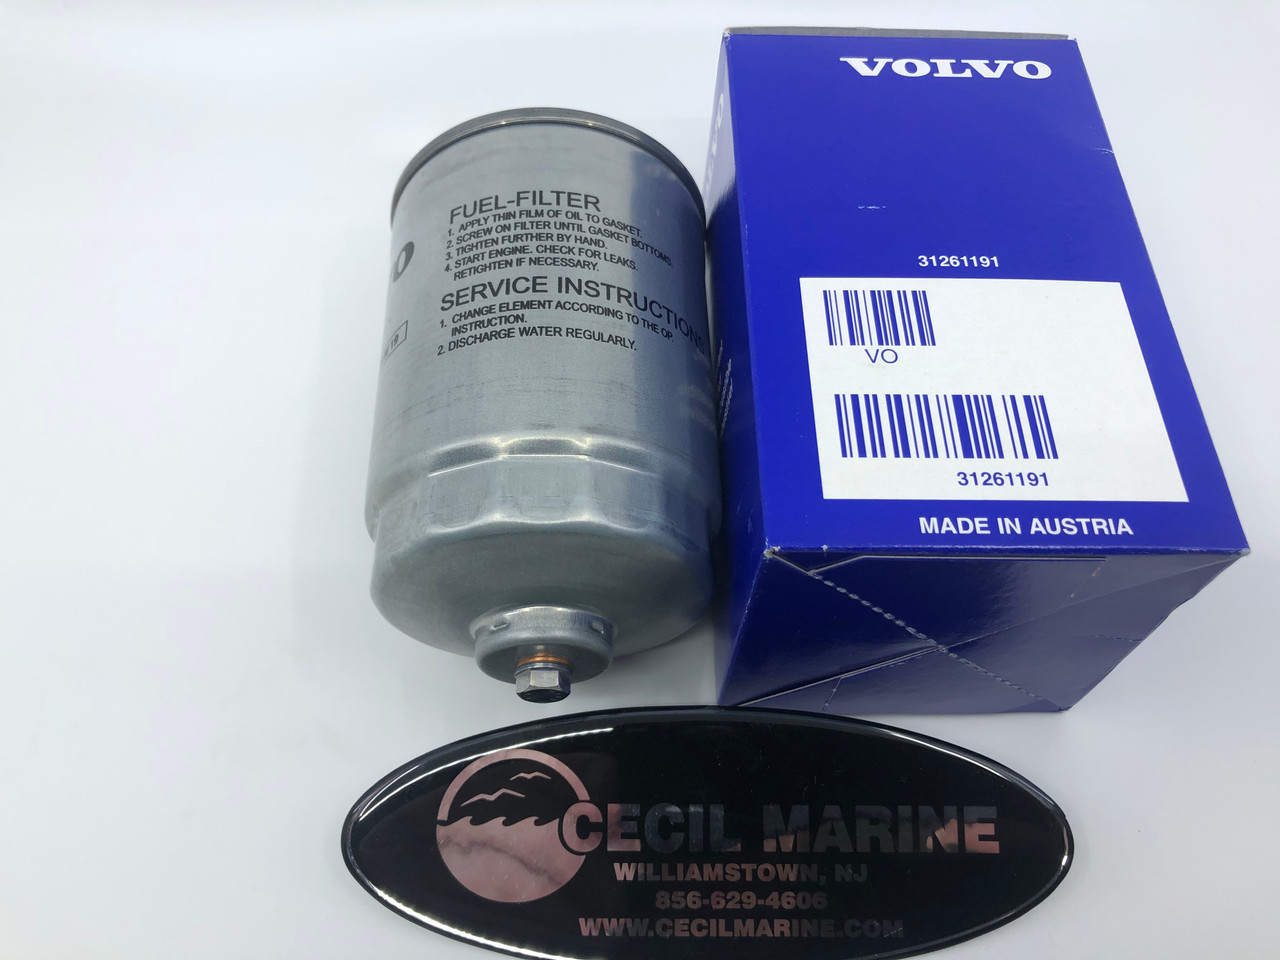 $59.99* GENUINE VOLVO no tax* FUEL FILTER 31261191 *In Stock & Ready To Ship!